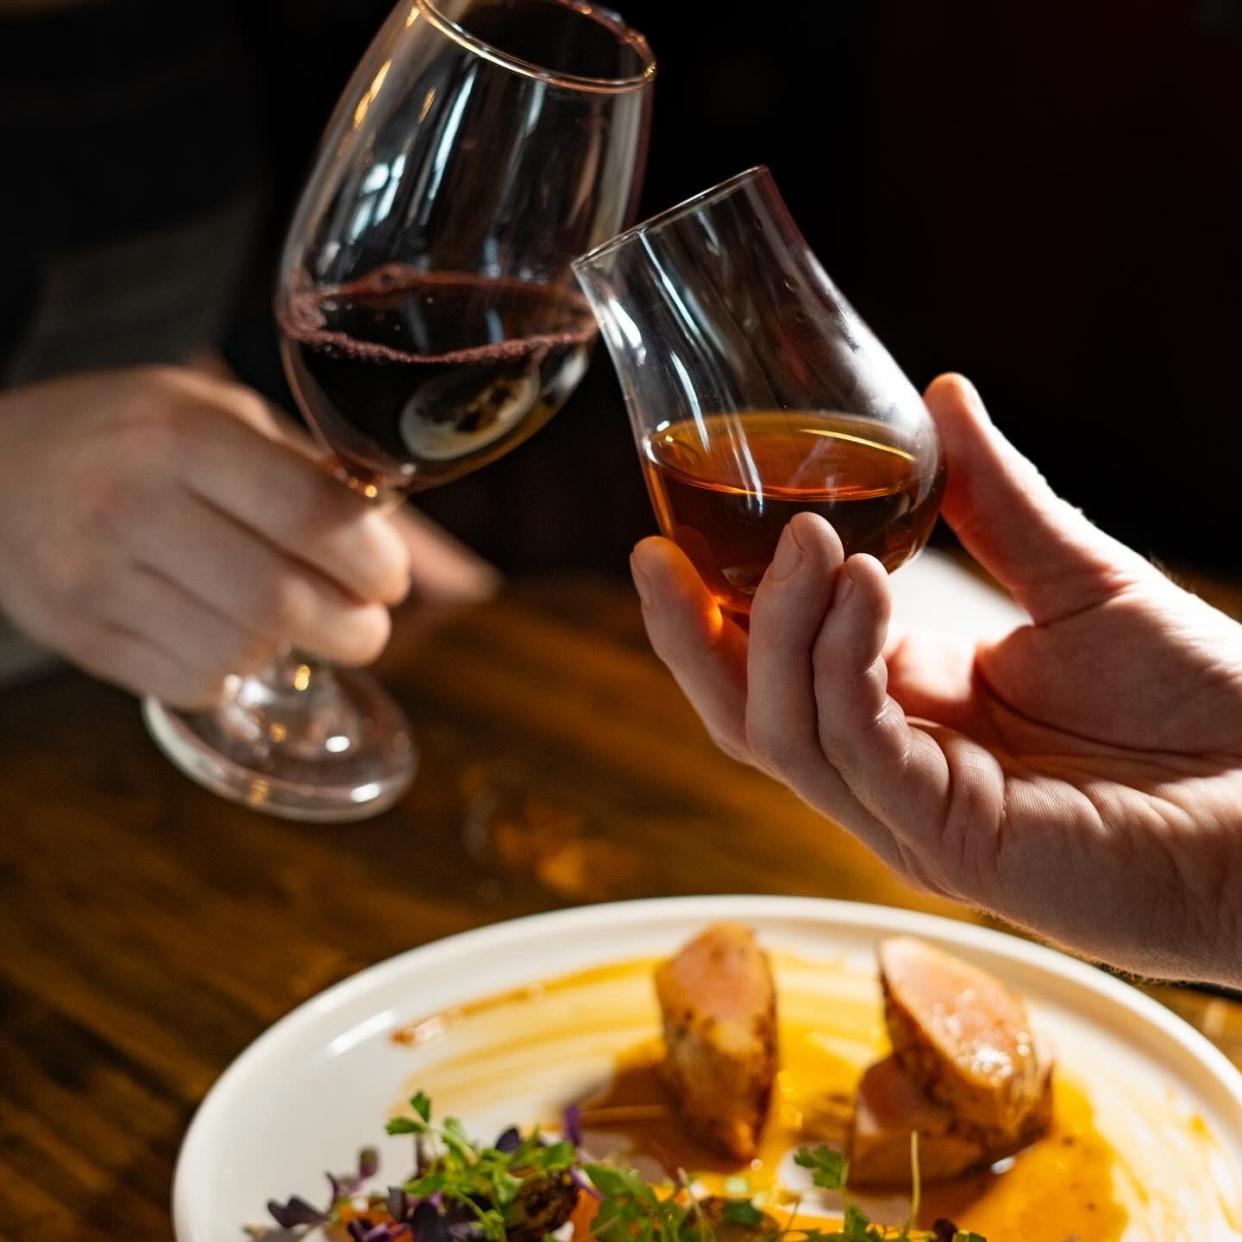 Let the five-course Valentine's Day meal at Brick and Barrel in Jupiter be the catalyst for romance.